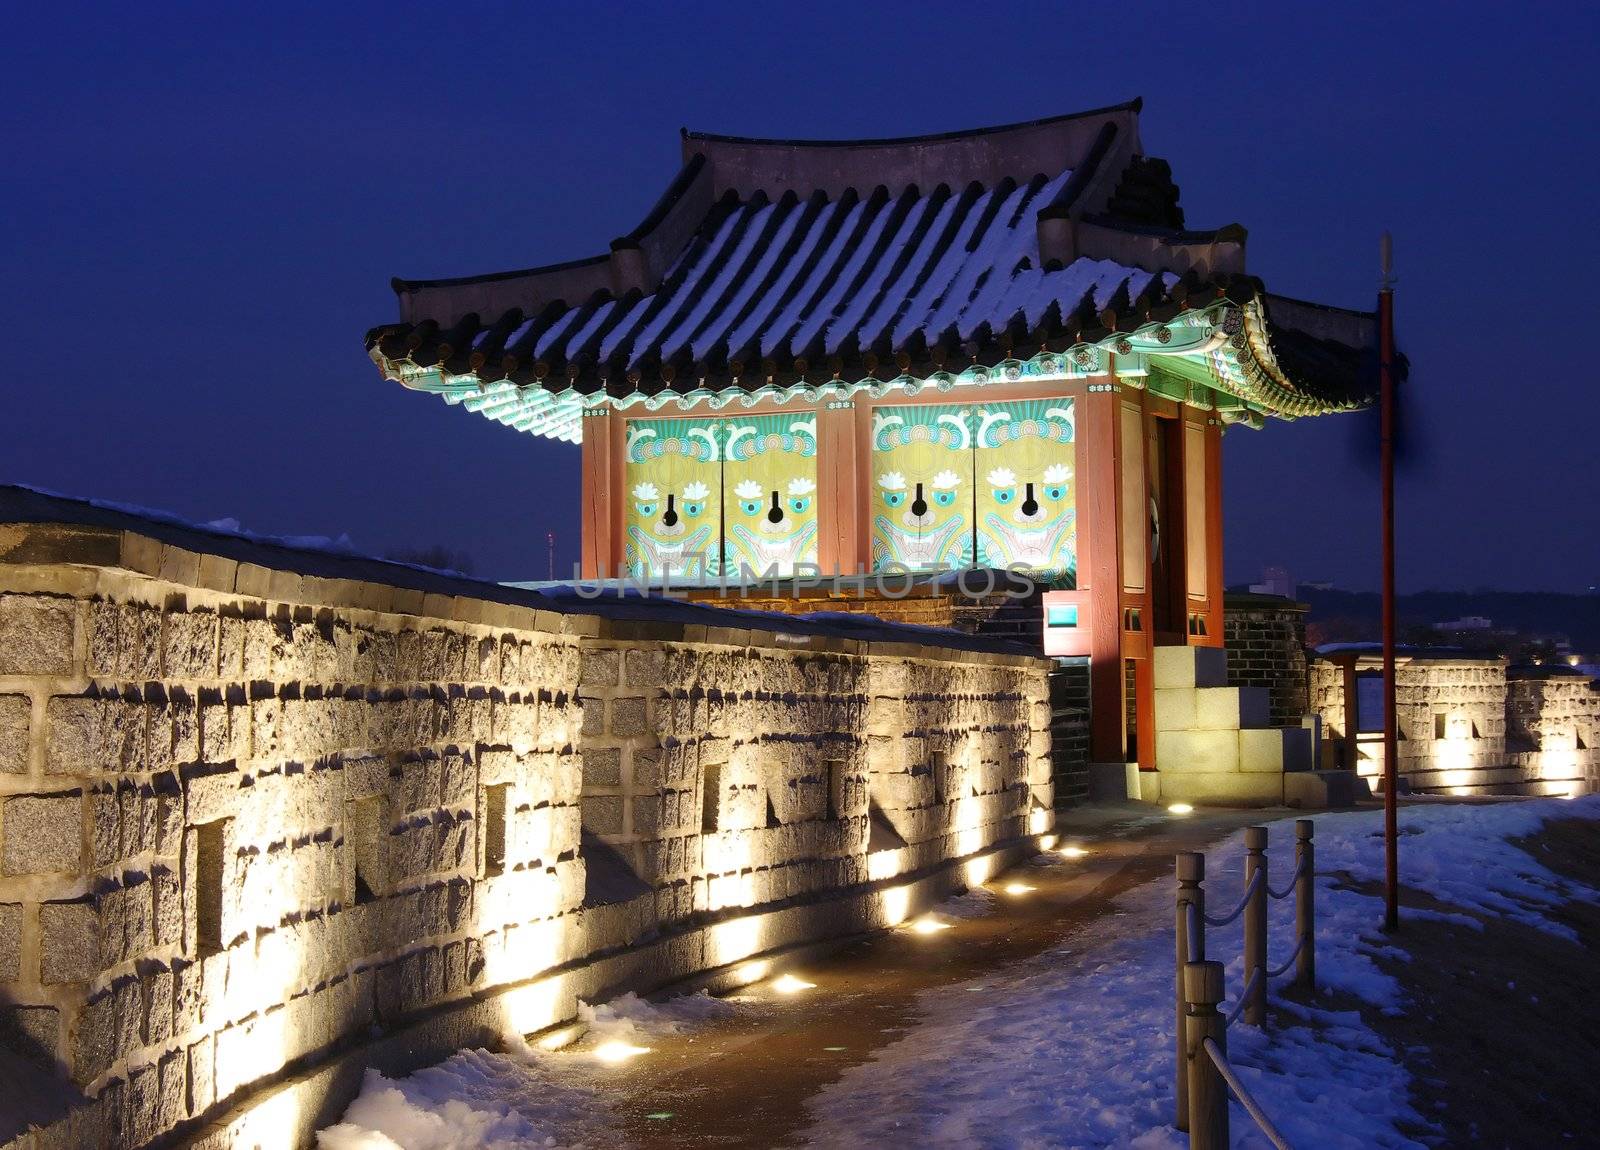 A sentry post on Hwaseong Fortress lit up at night. Hwaseong was constructed for King Jeongjo in 1796 during the Joseon dynasty. It is now a UNESCO World Heritage site. Suwon City, South Korea.